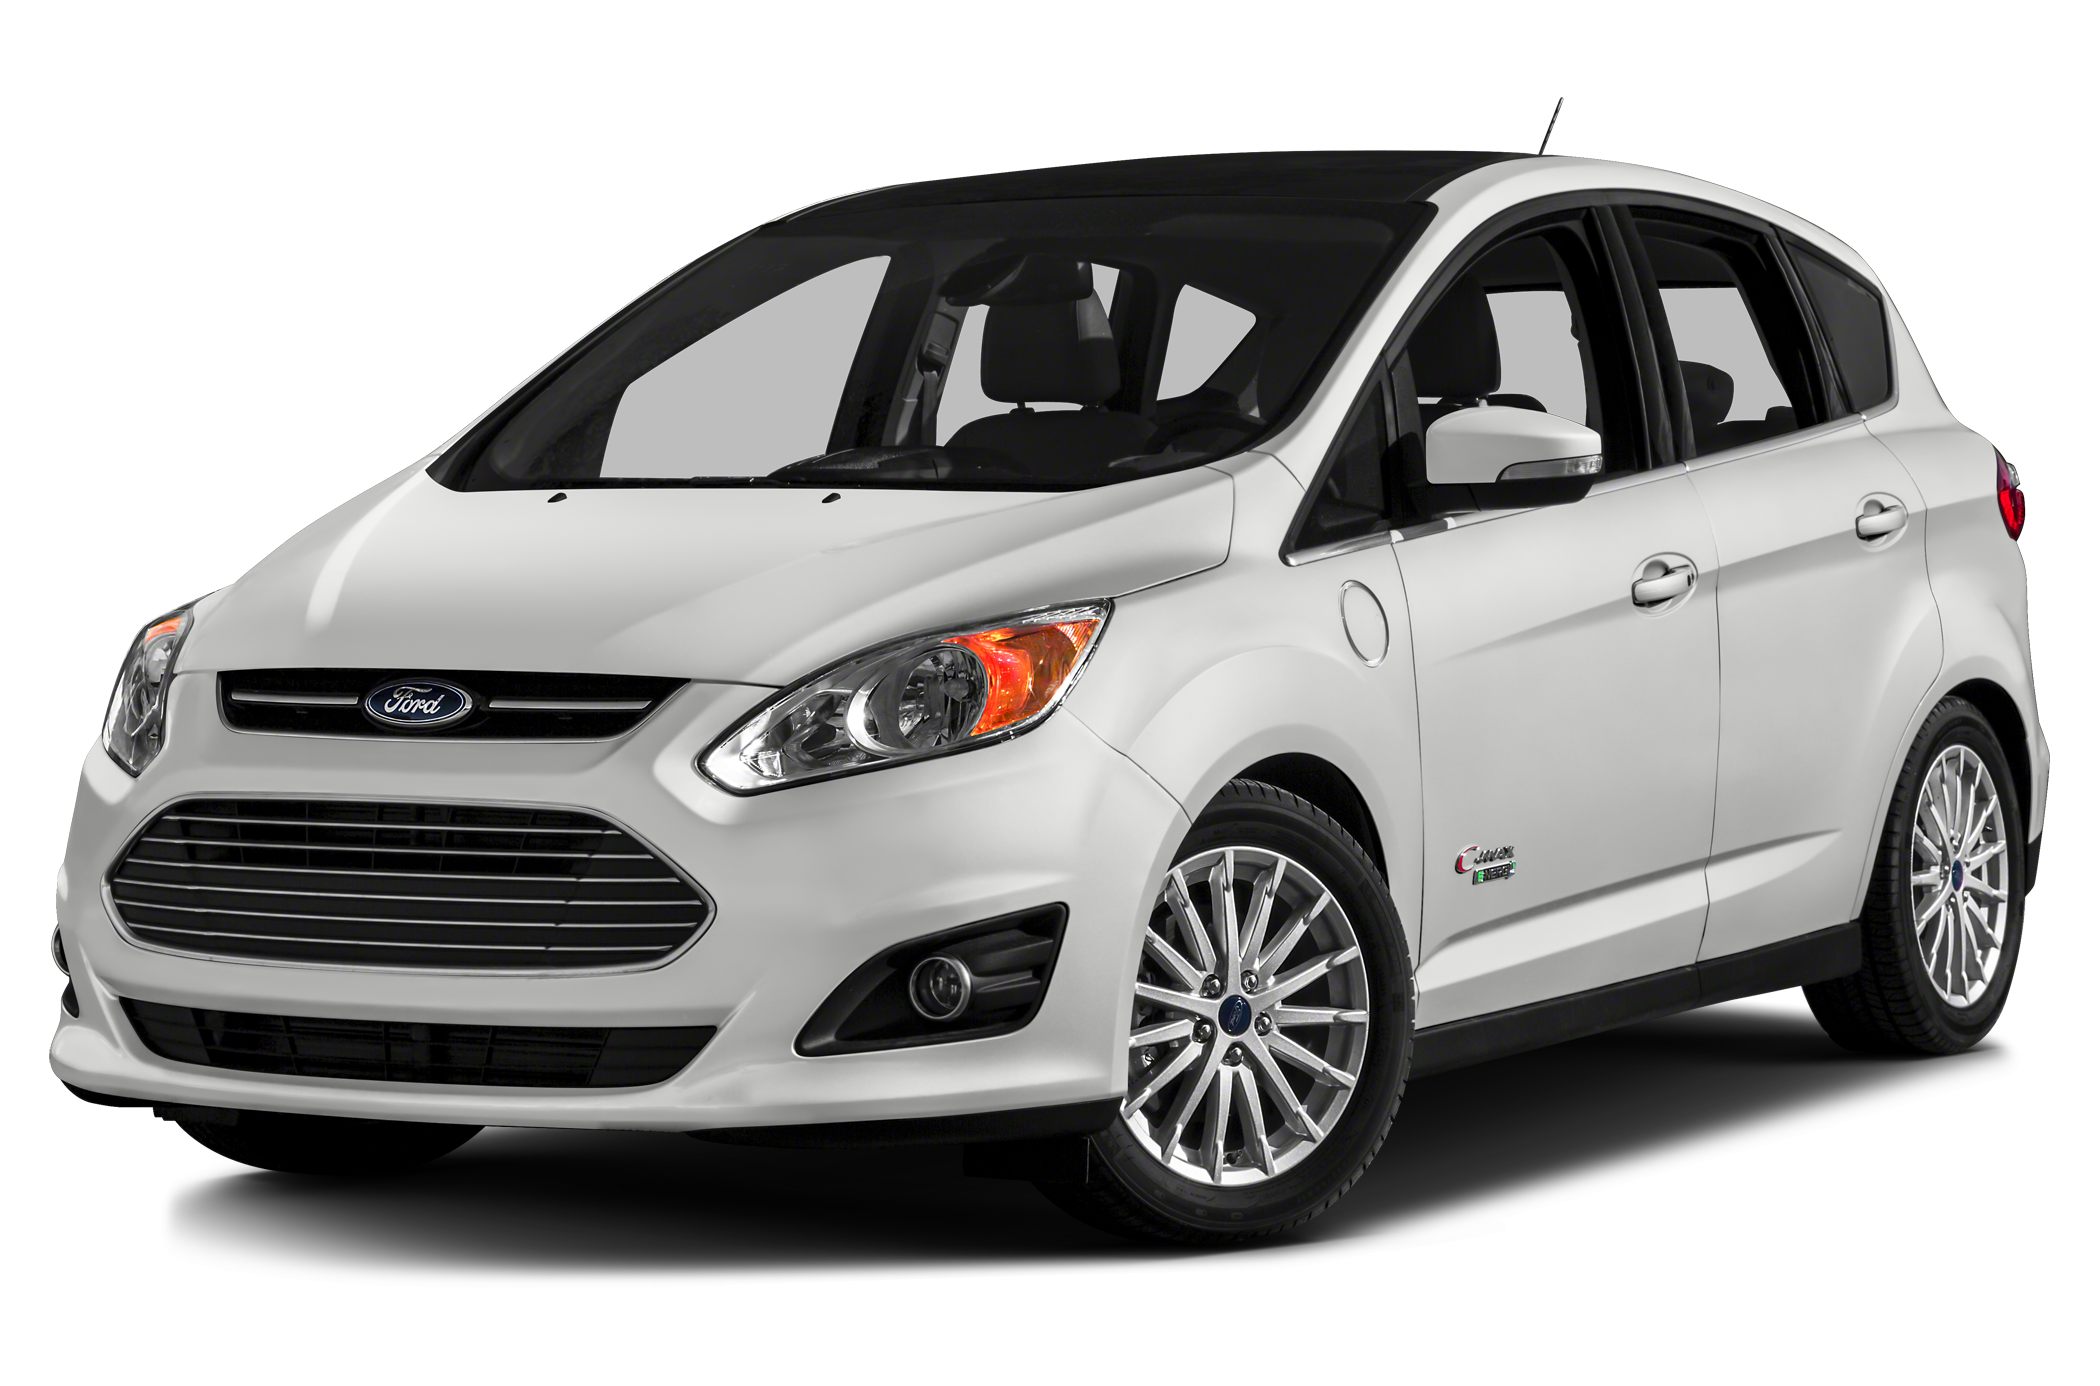 2017 Ford CMax Hybrid Deals, Prices, Incentives & Leases, Overview